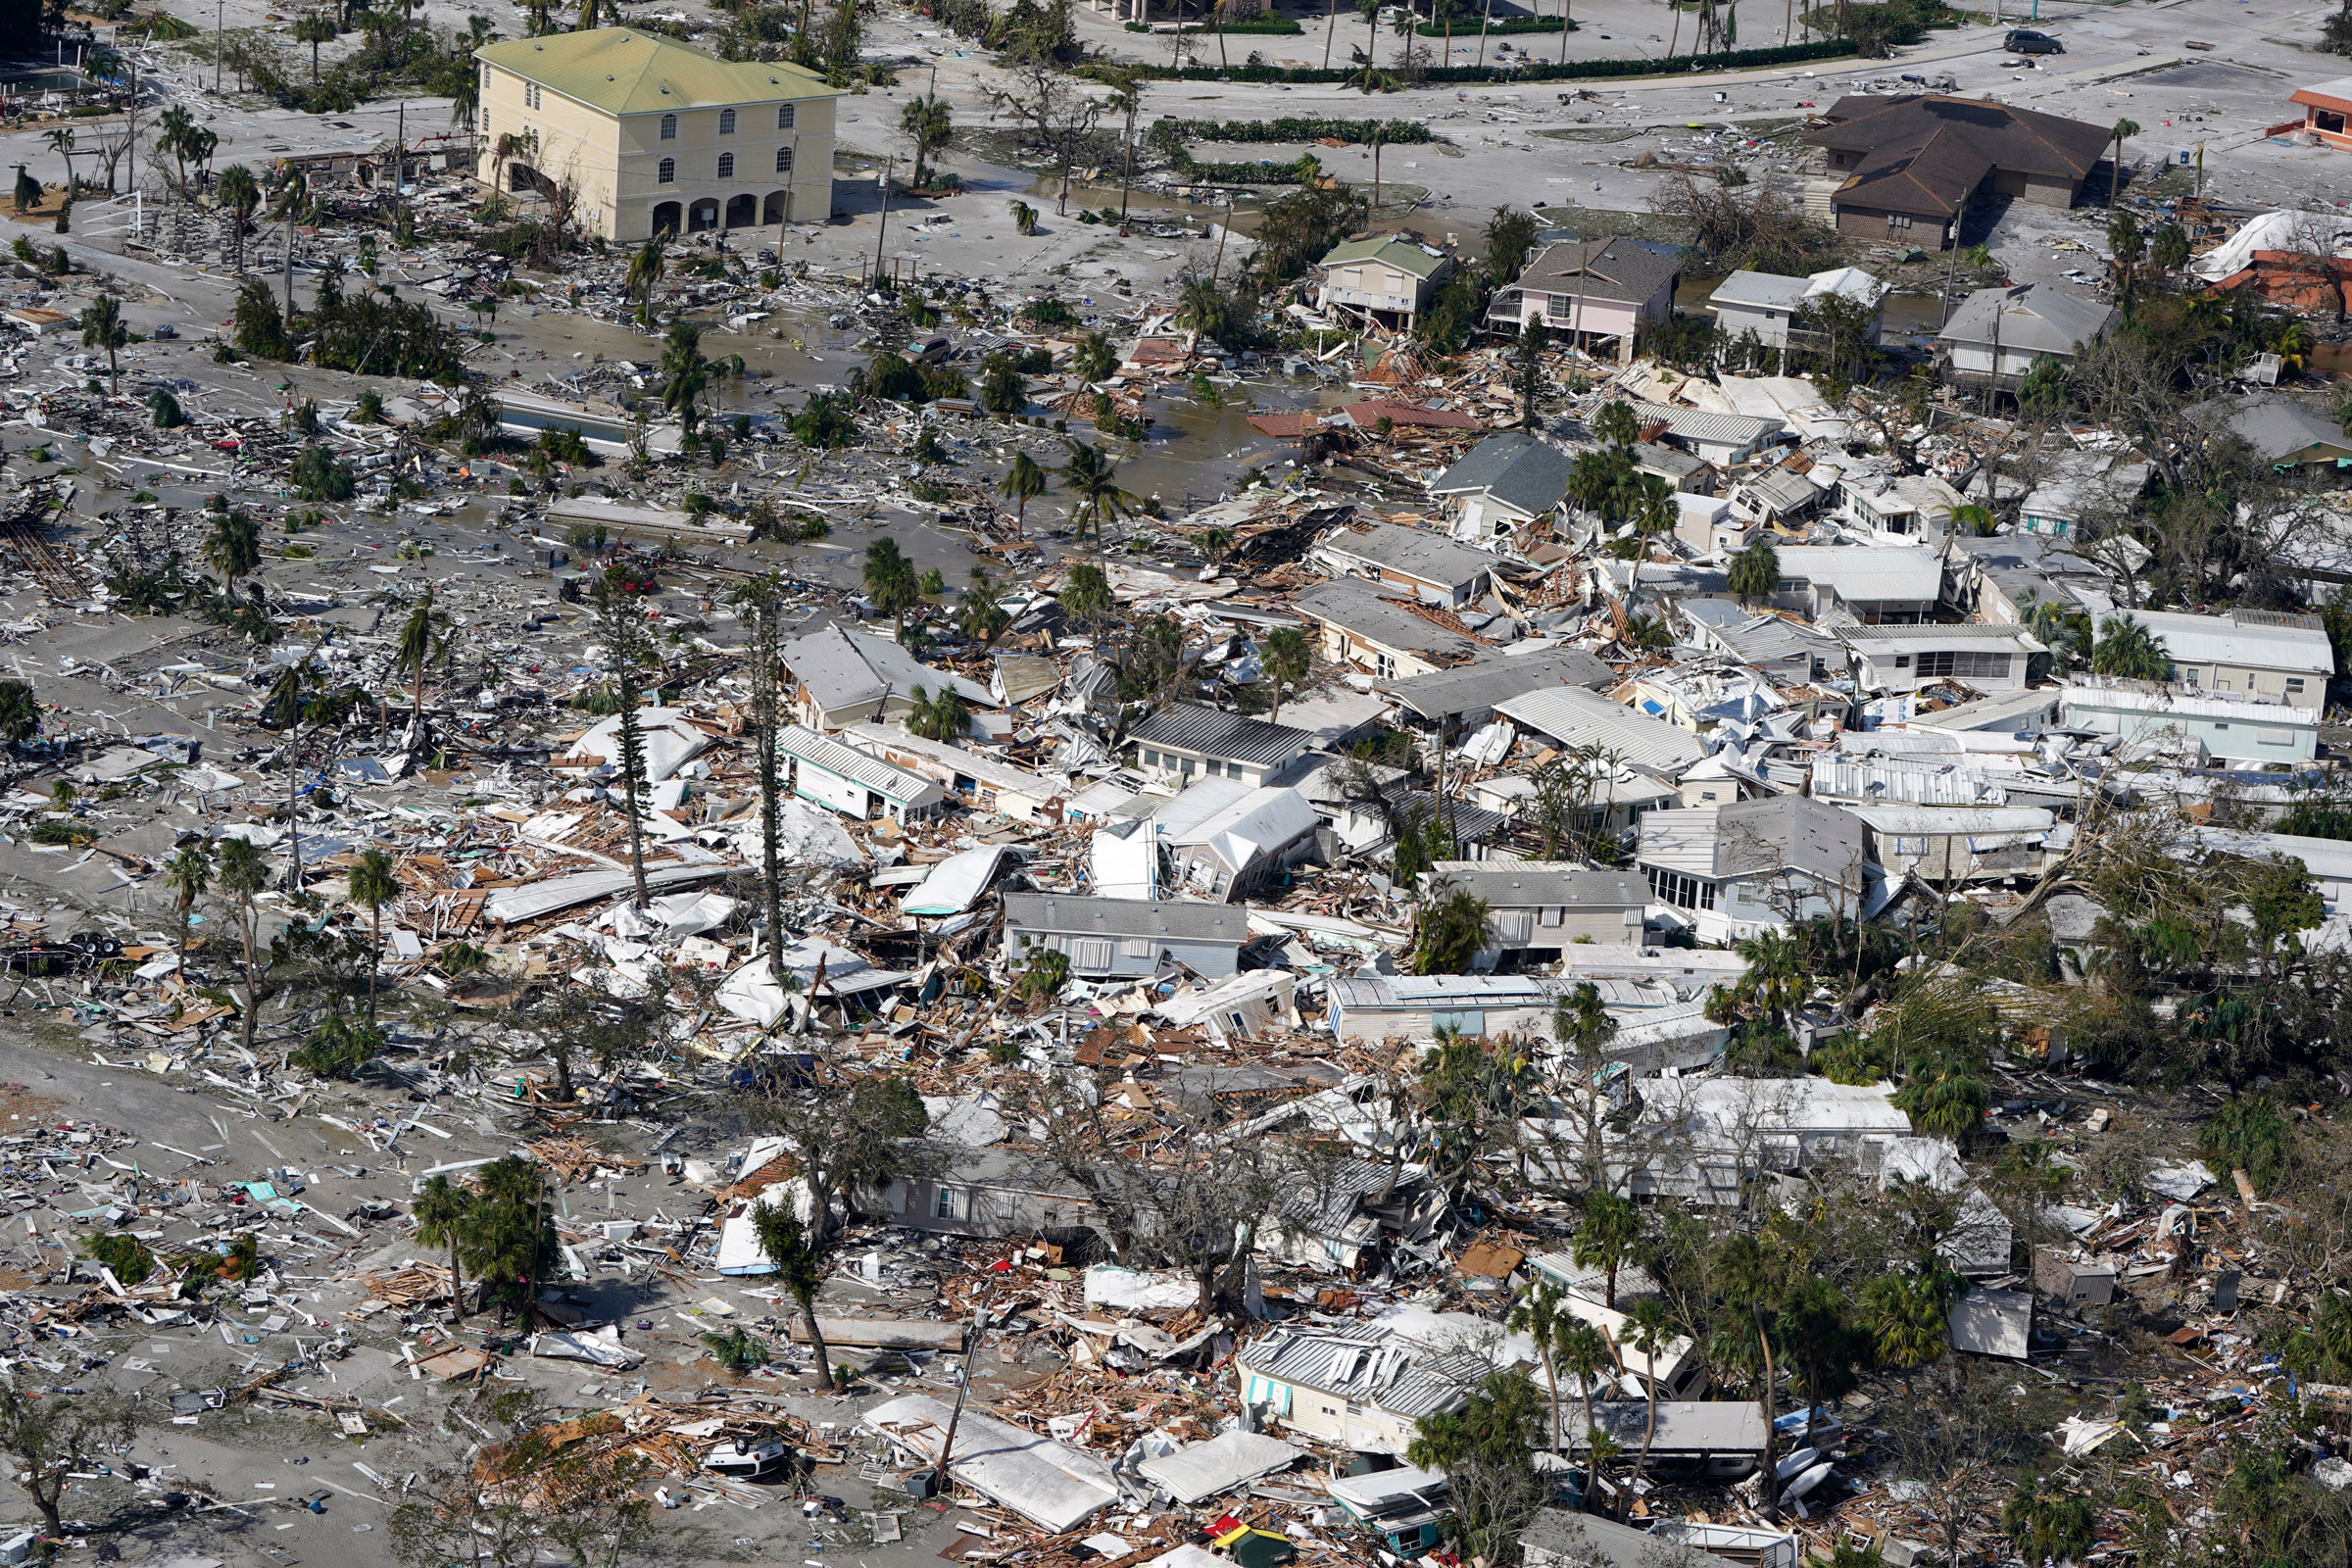 Damaged homes and debris are shown in the aftermath of Hurricane Ian, Sept. 29, 2022, in Fort Myers, Fla. (Wilfredo Lee—AP)